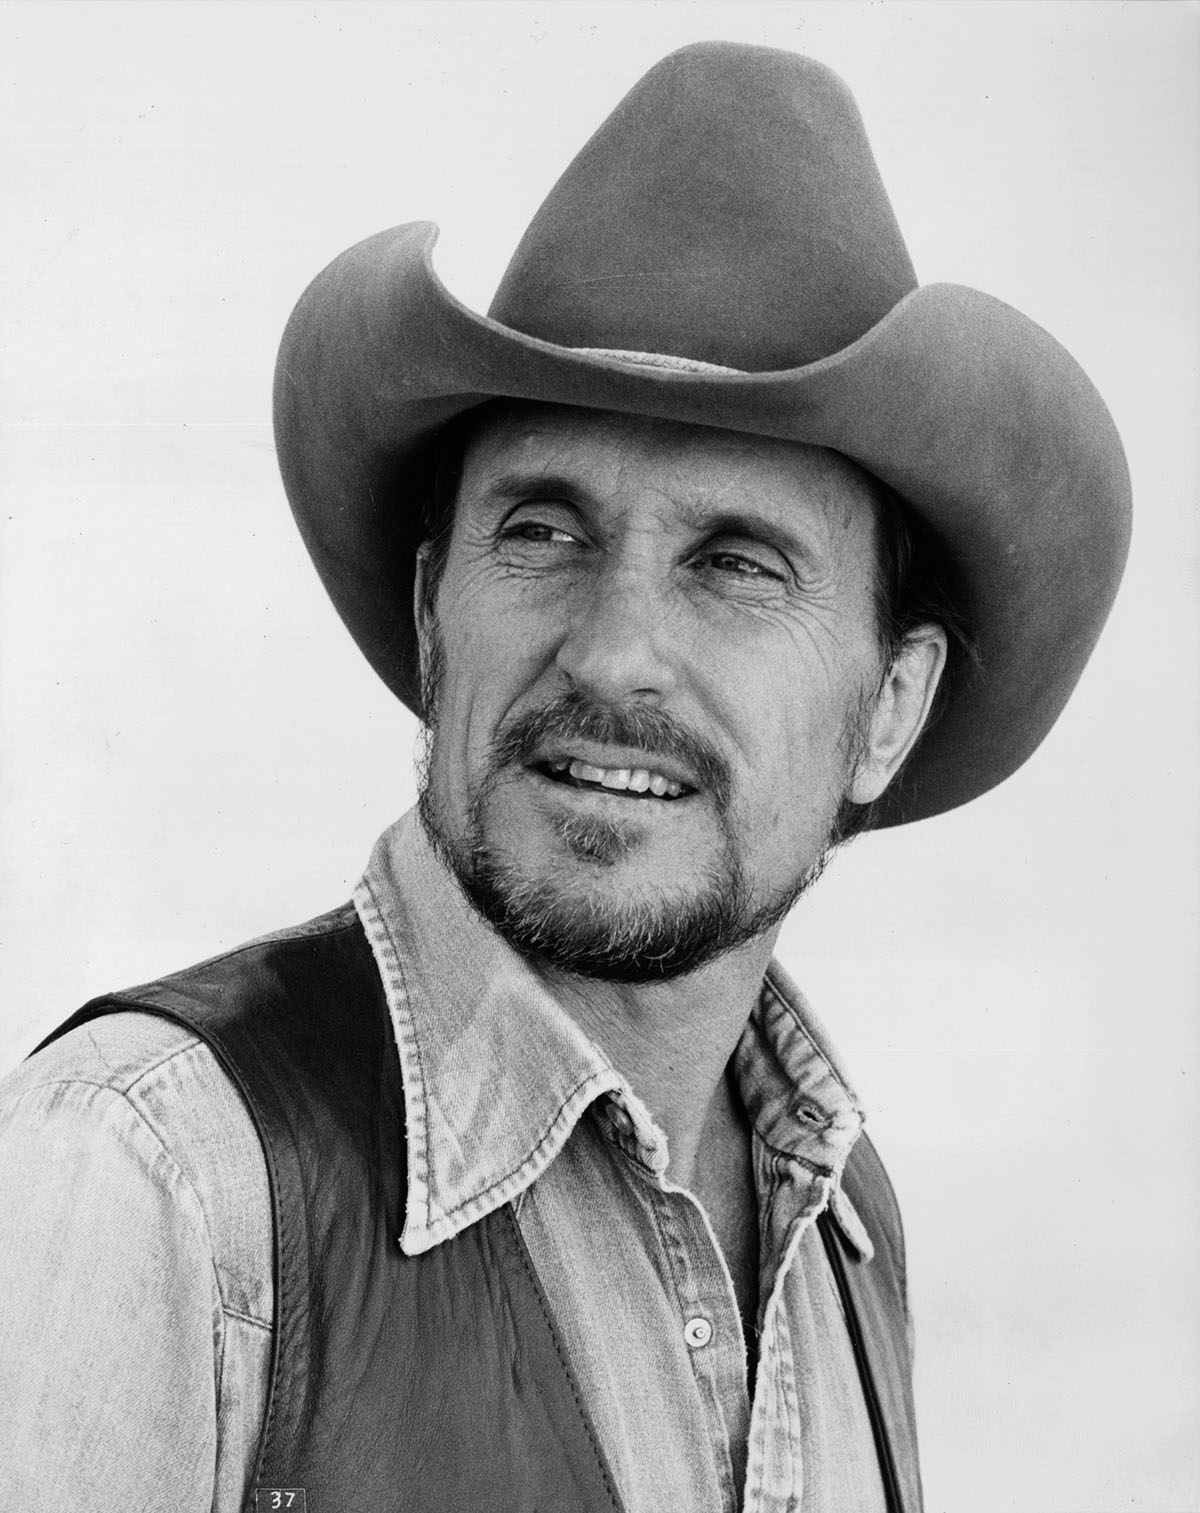 A black and white image of a man in a cowboy hat